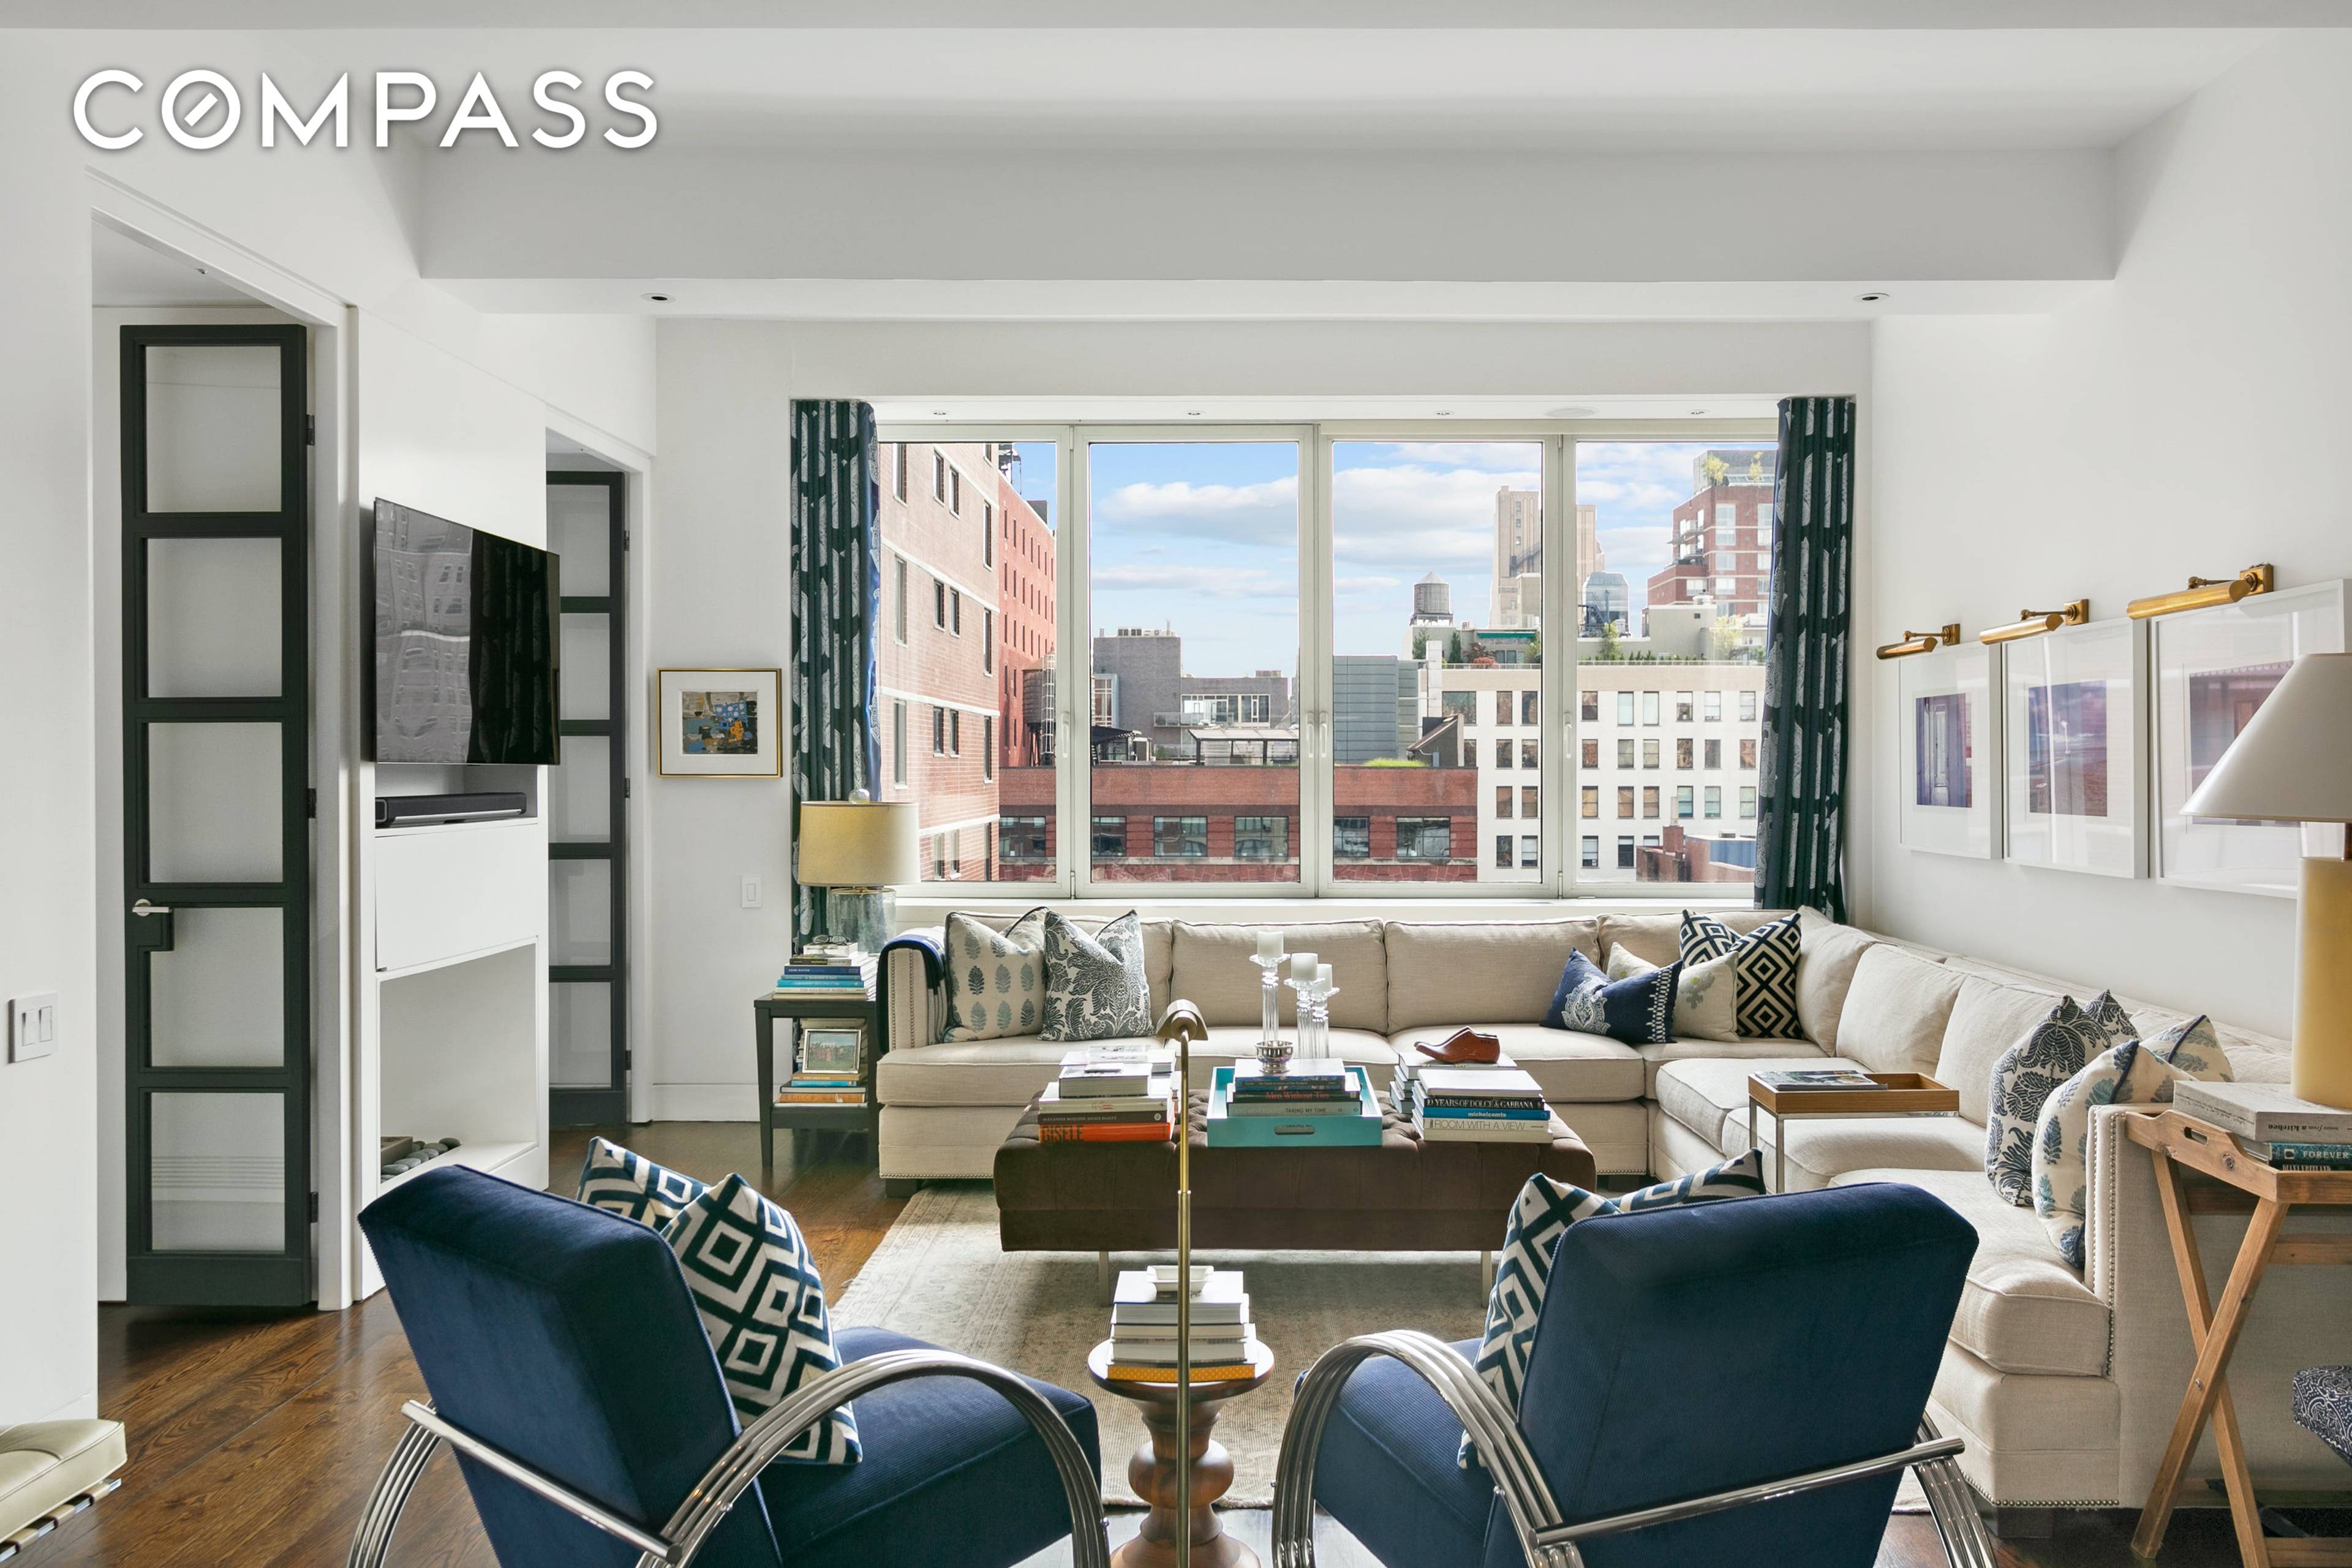 Architectural, Spacious, Unexpected and Functional describe this stunning pre war home located high above the hustle and bustle of the streets on the 8th floor at 251 West 19th Street.